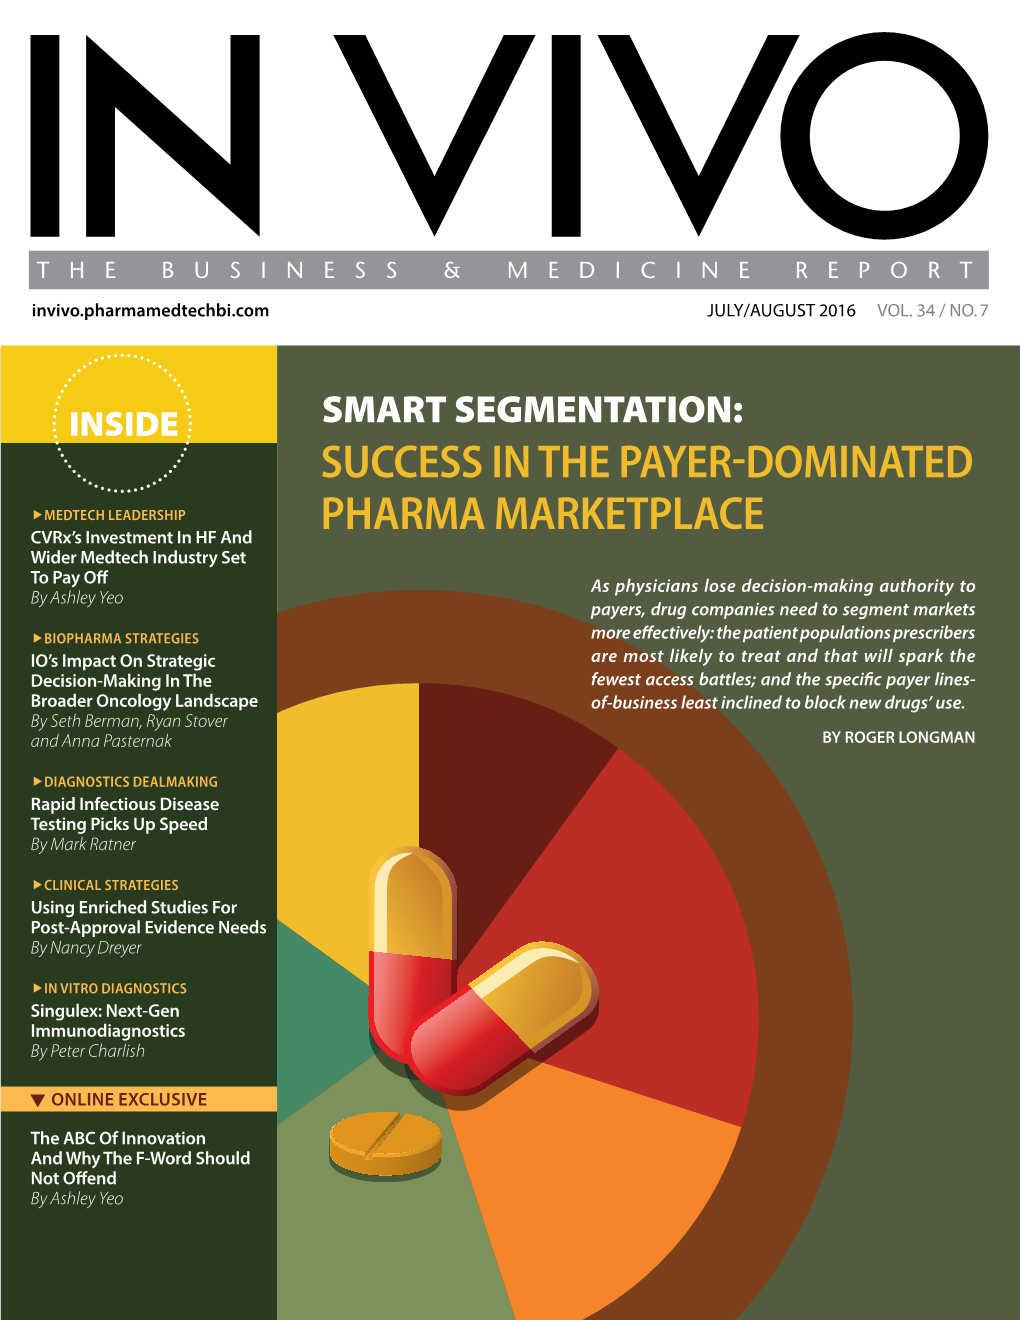 Success in the Payer Dominated Pharma